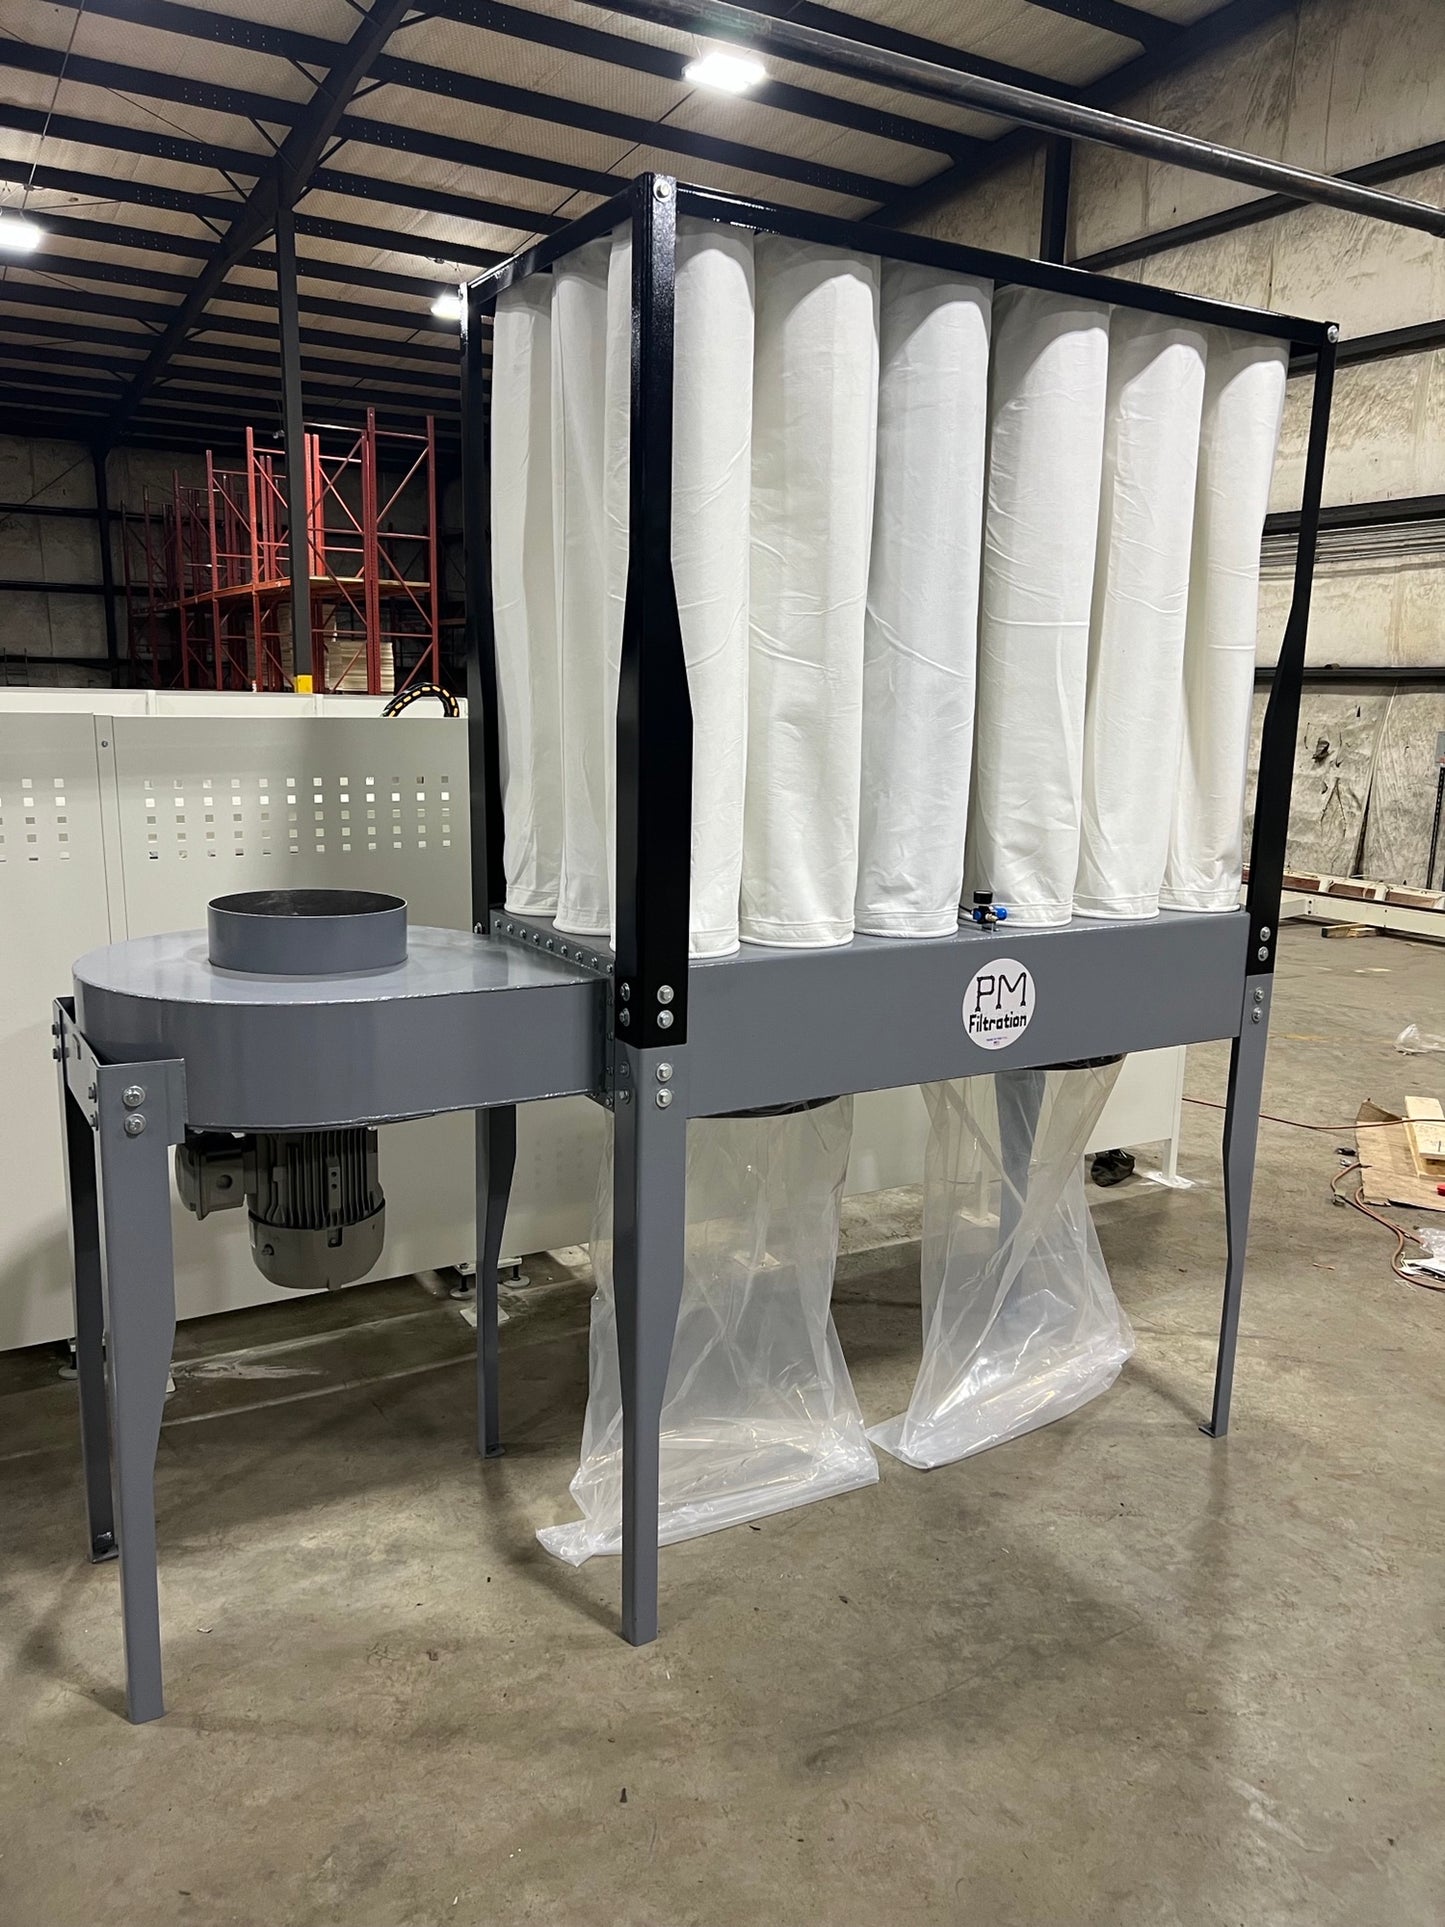 PMF Dust Collector -2 Bag Collector- NEW! in Michigan - Show Demo!